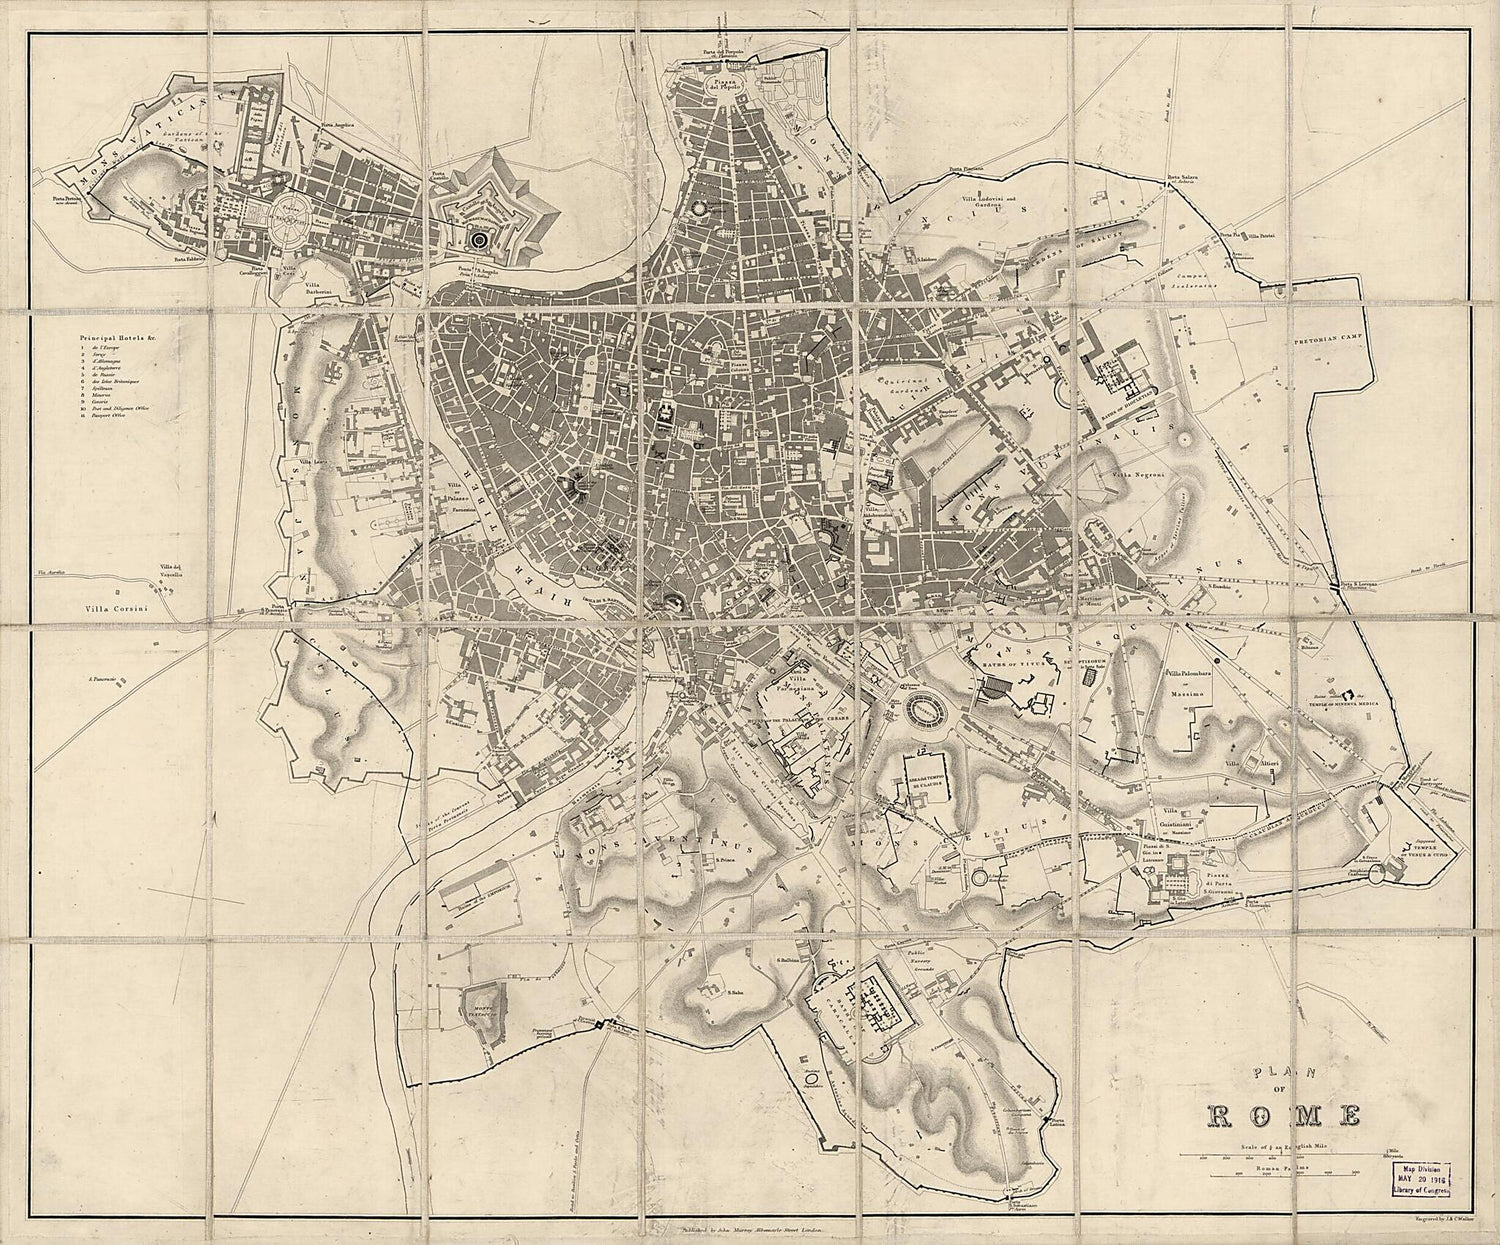 This old map of Plan of Rome from 1850 was created by Millard Fillmore,  J. &amp; C. Walker (Firm), John Murray in 1850